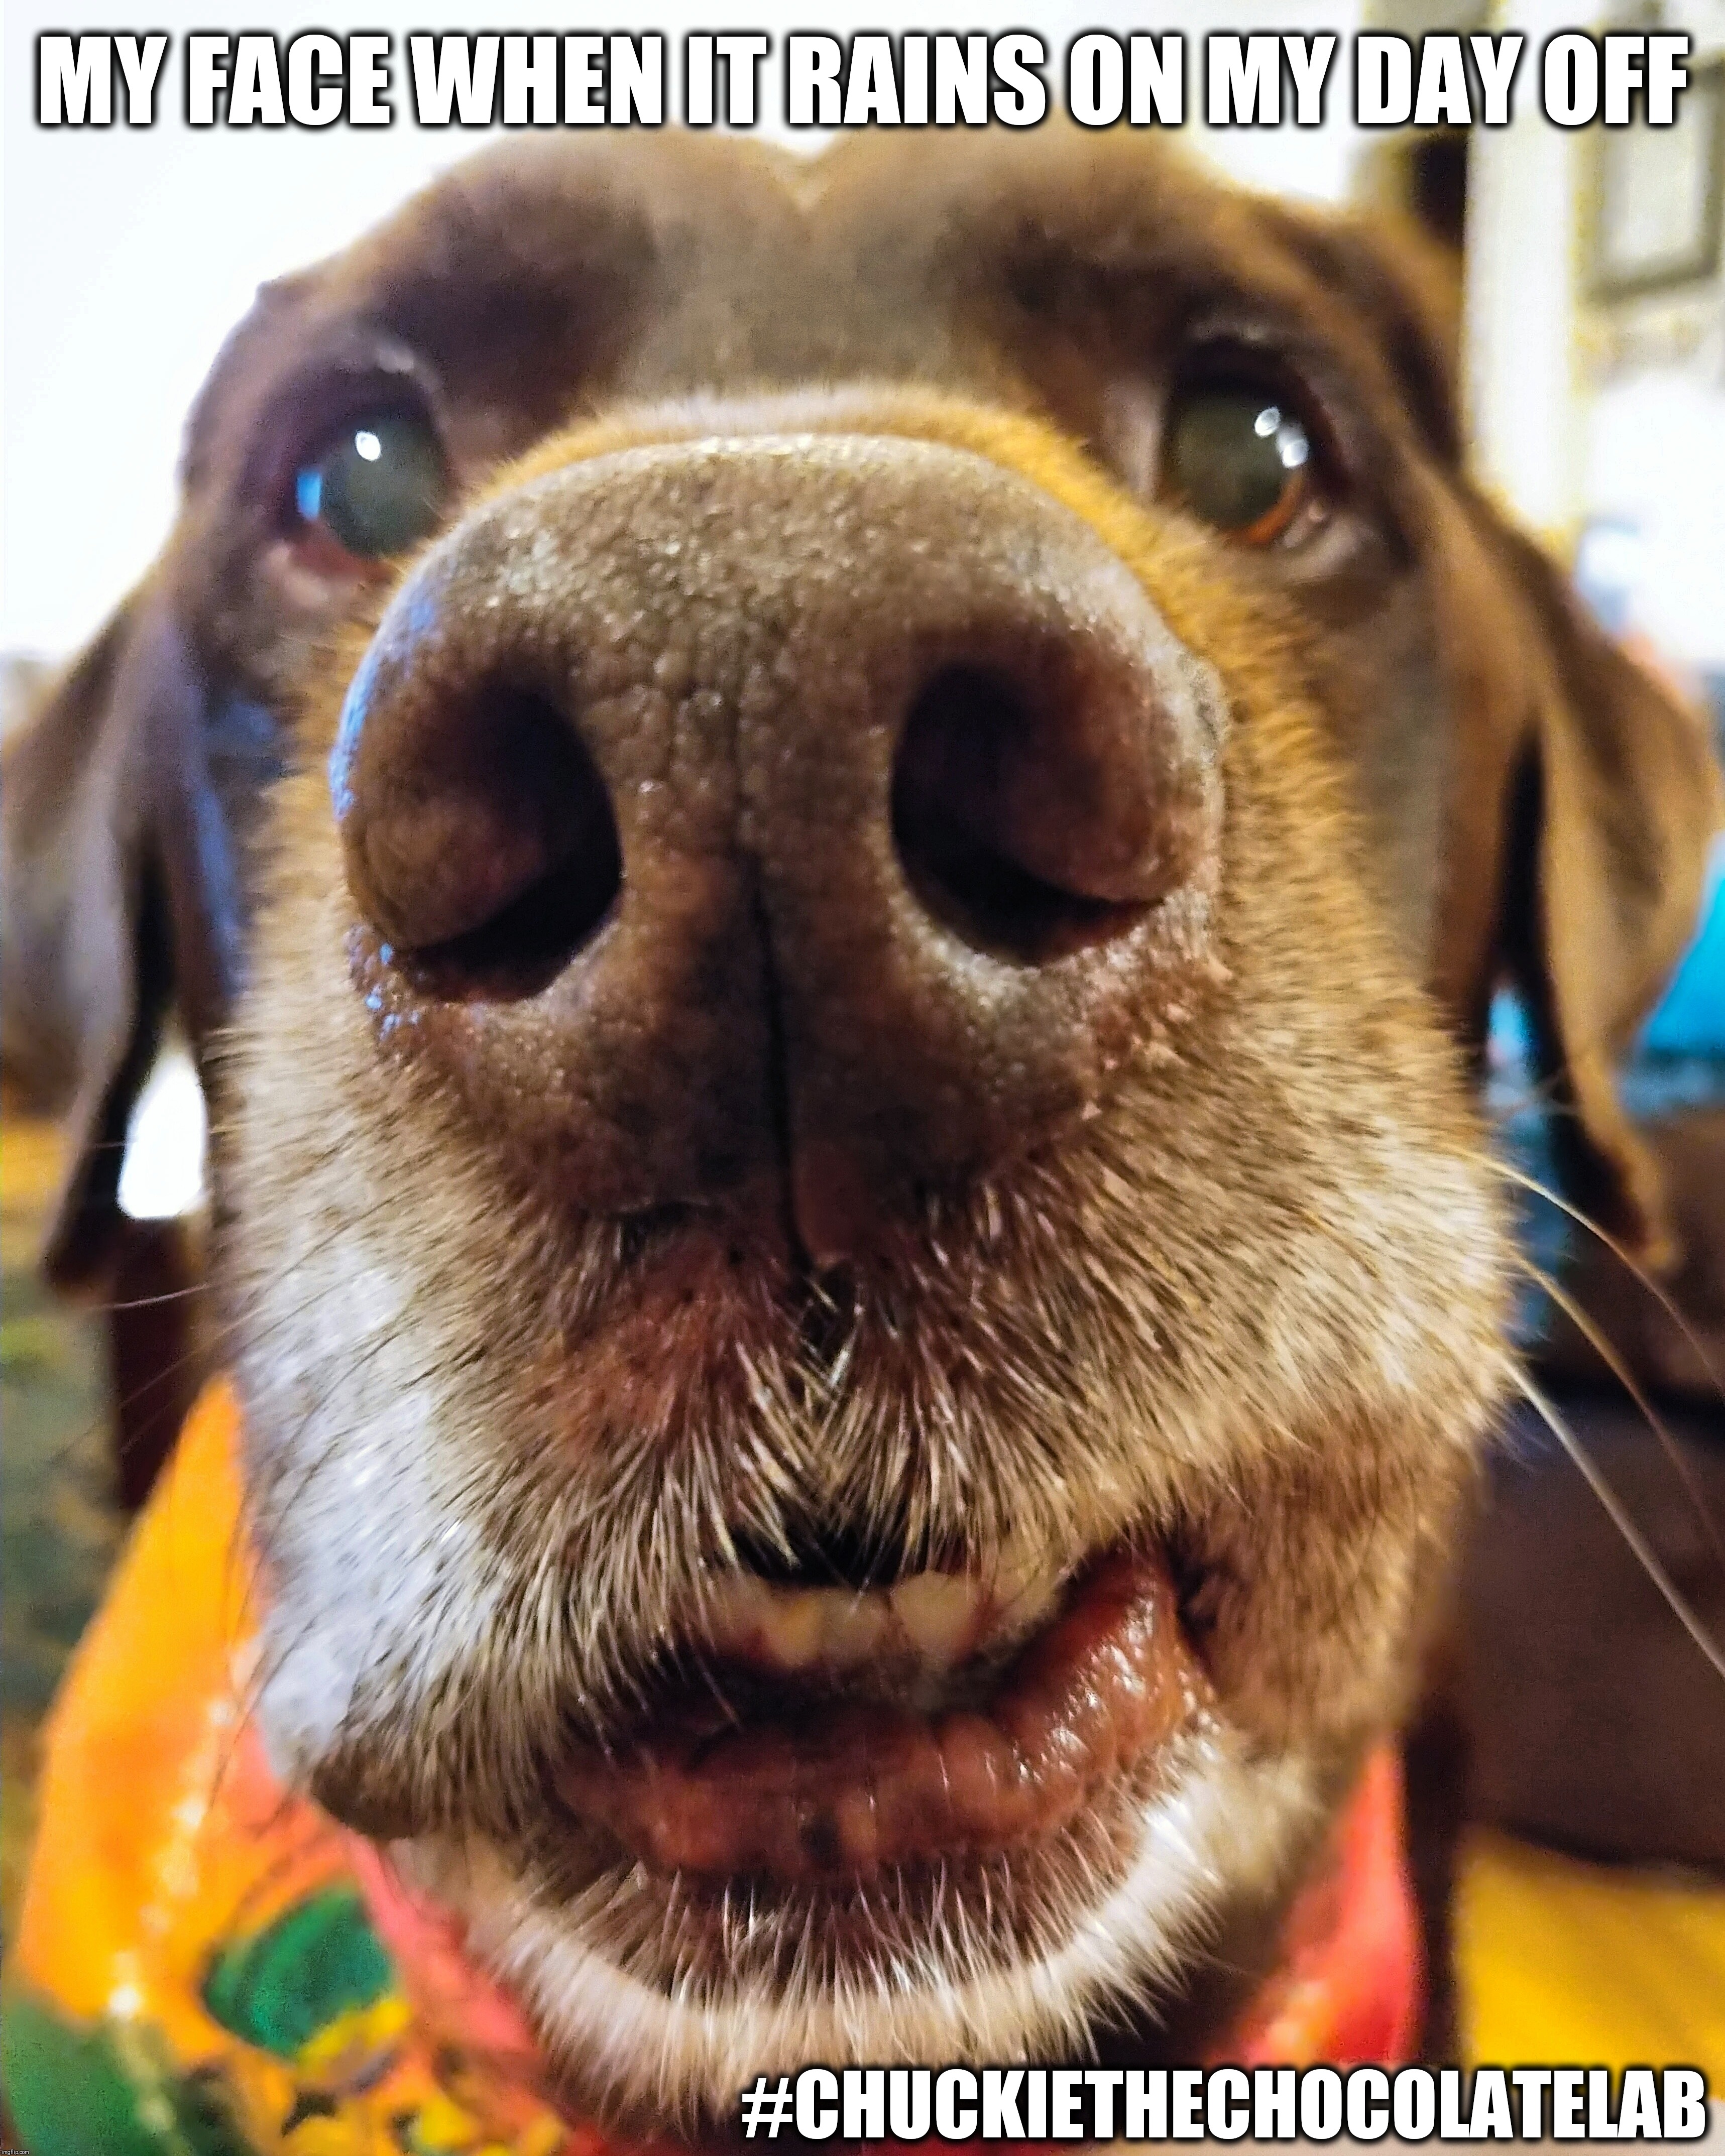 When it rains on my day off |  MY FACE WHEN IT RAINS ON MY DAY OFF; #CHUCKIETHECHOCOLATELAB | image tagged in chuckie the chocolate lab,rain,dogs,teef,cute,funny | made w/ Imgflip meme maker